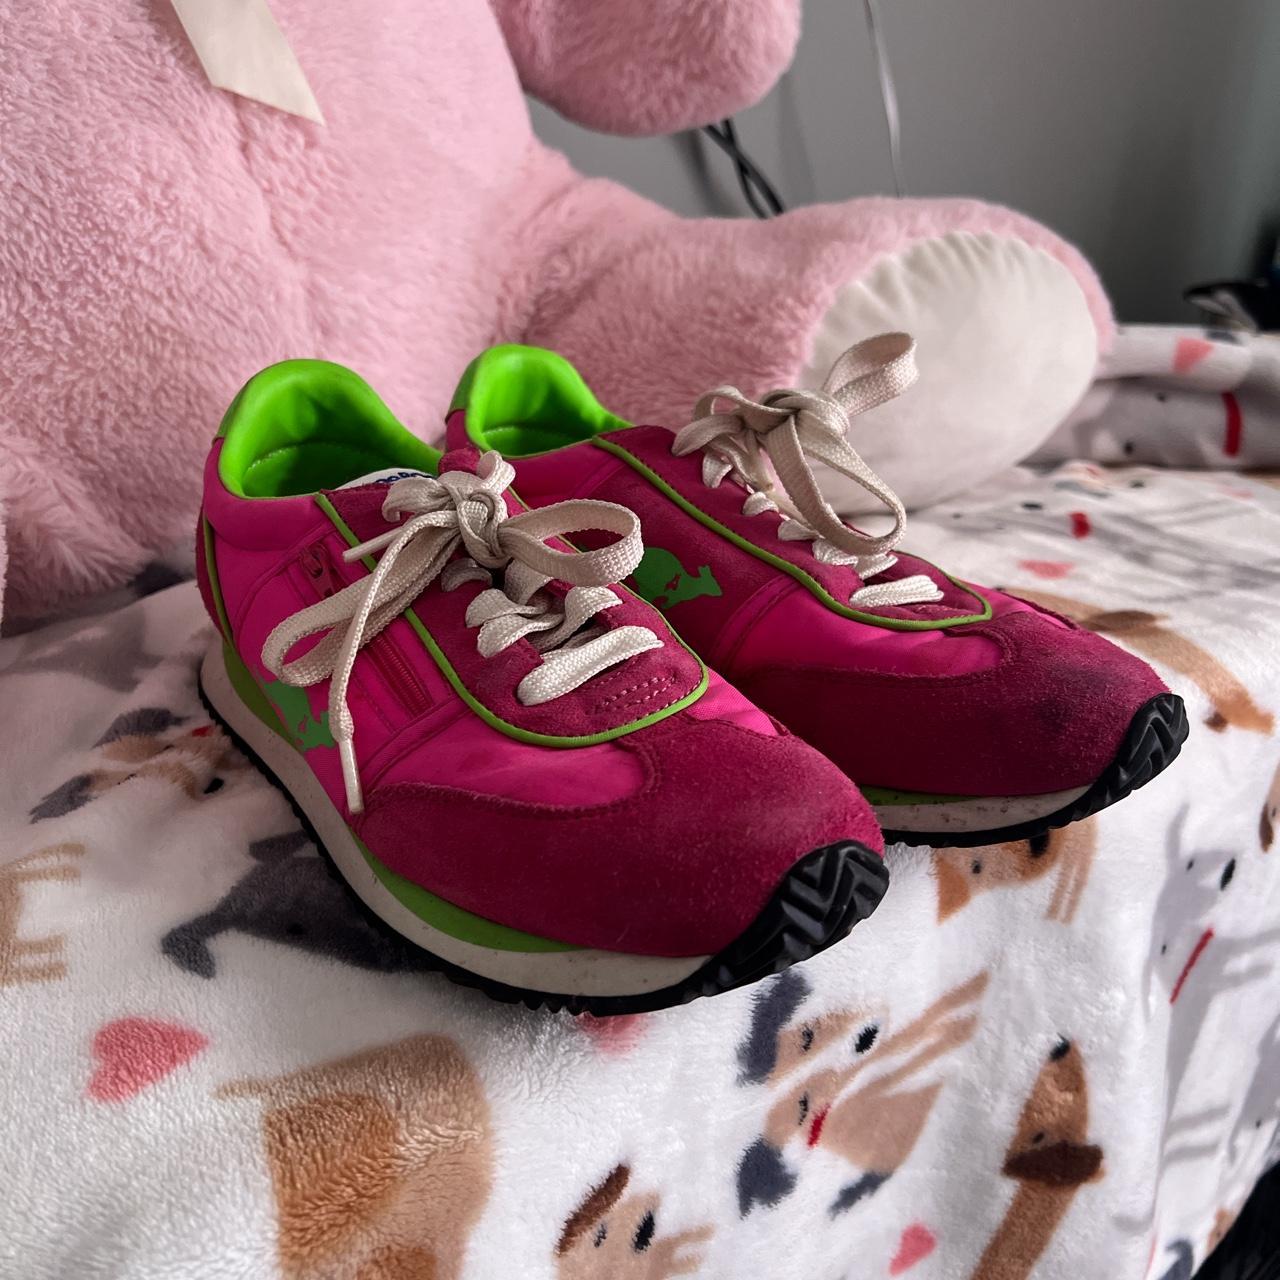 KangaROOS Women's Pink and Green Trainers (2)